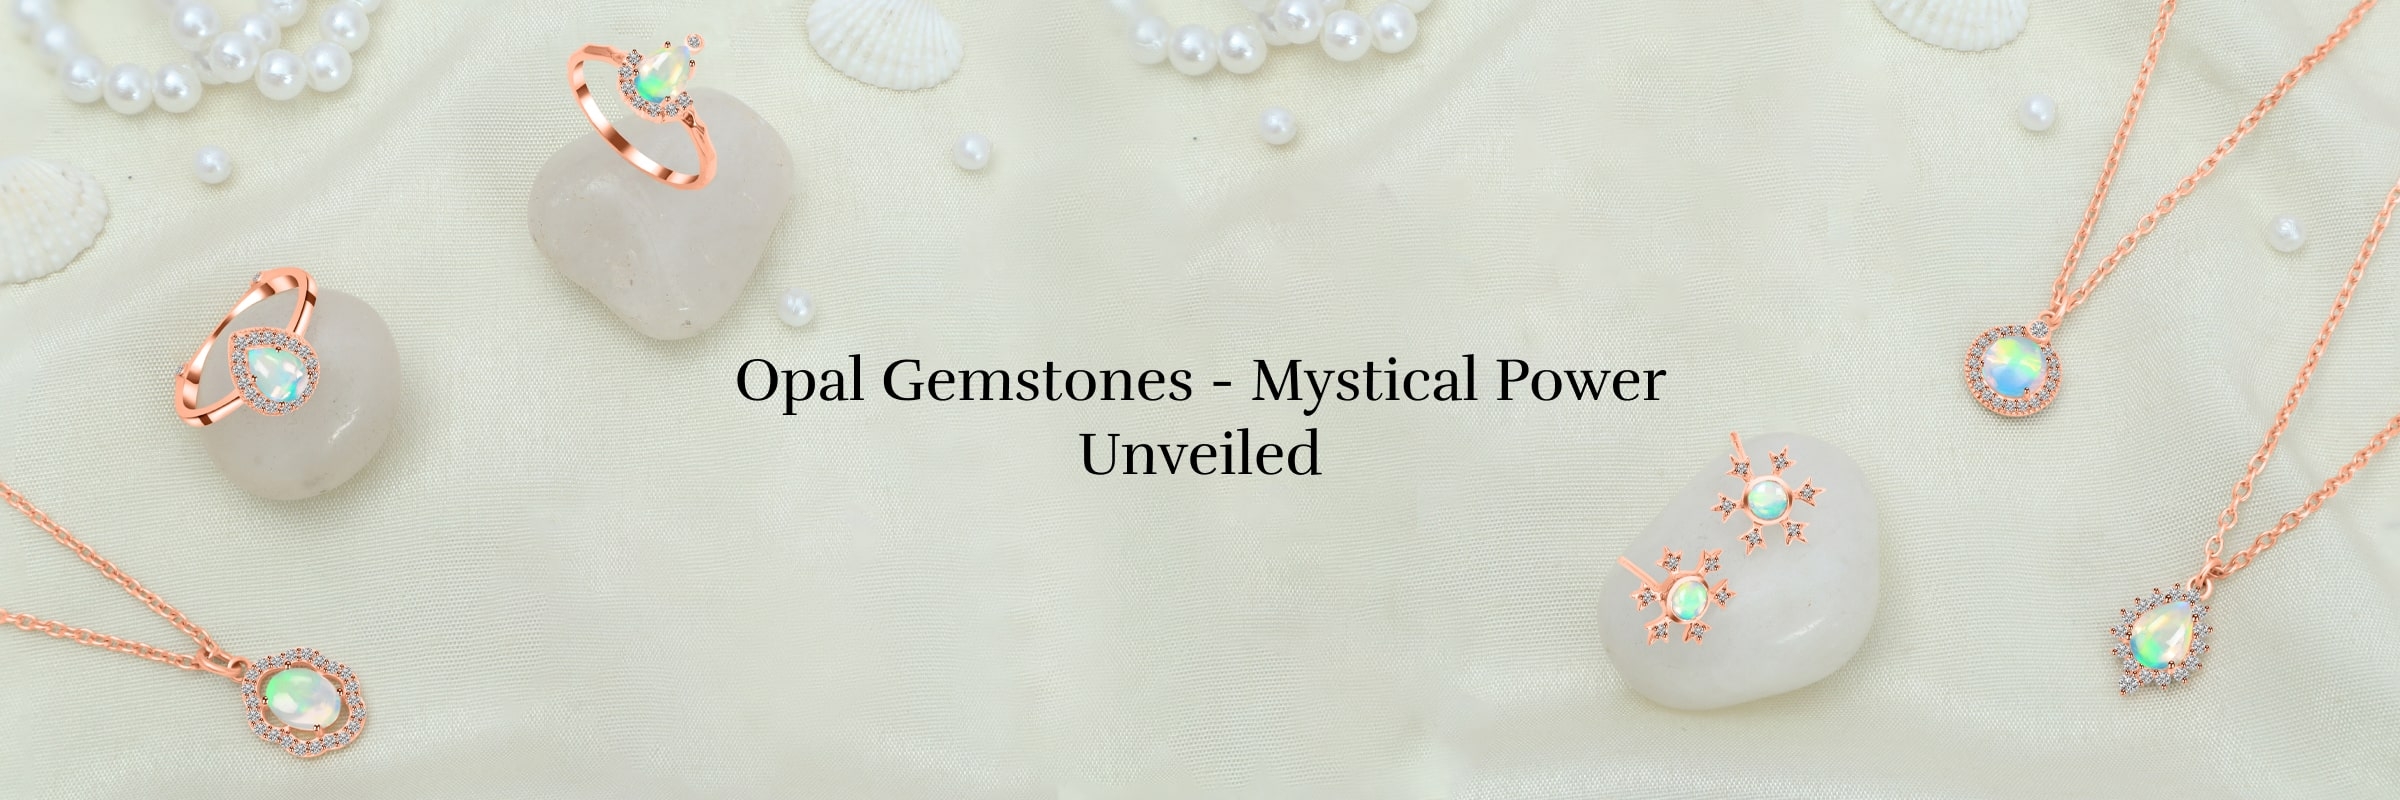 The Mystical Powers of Opal Gemstones